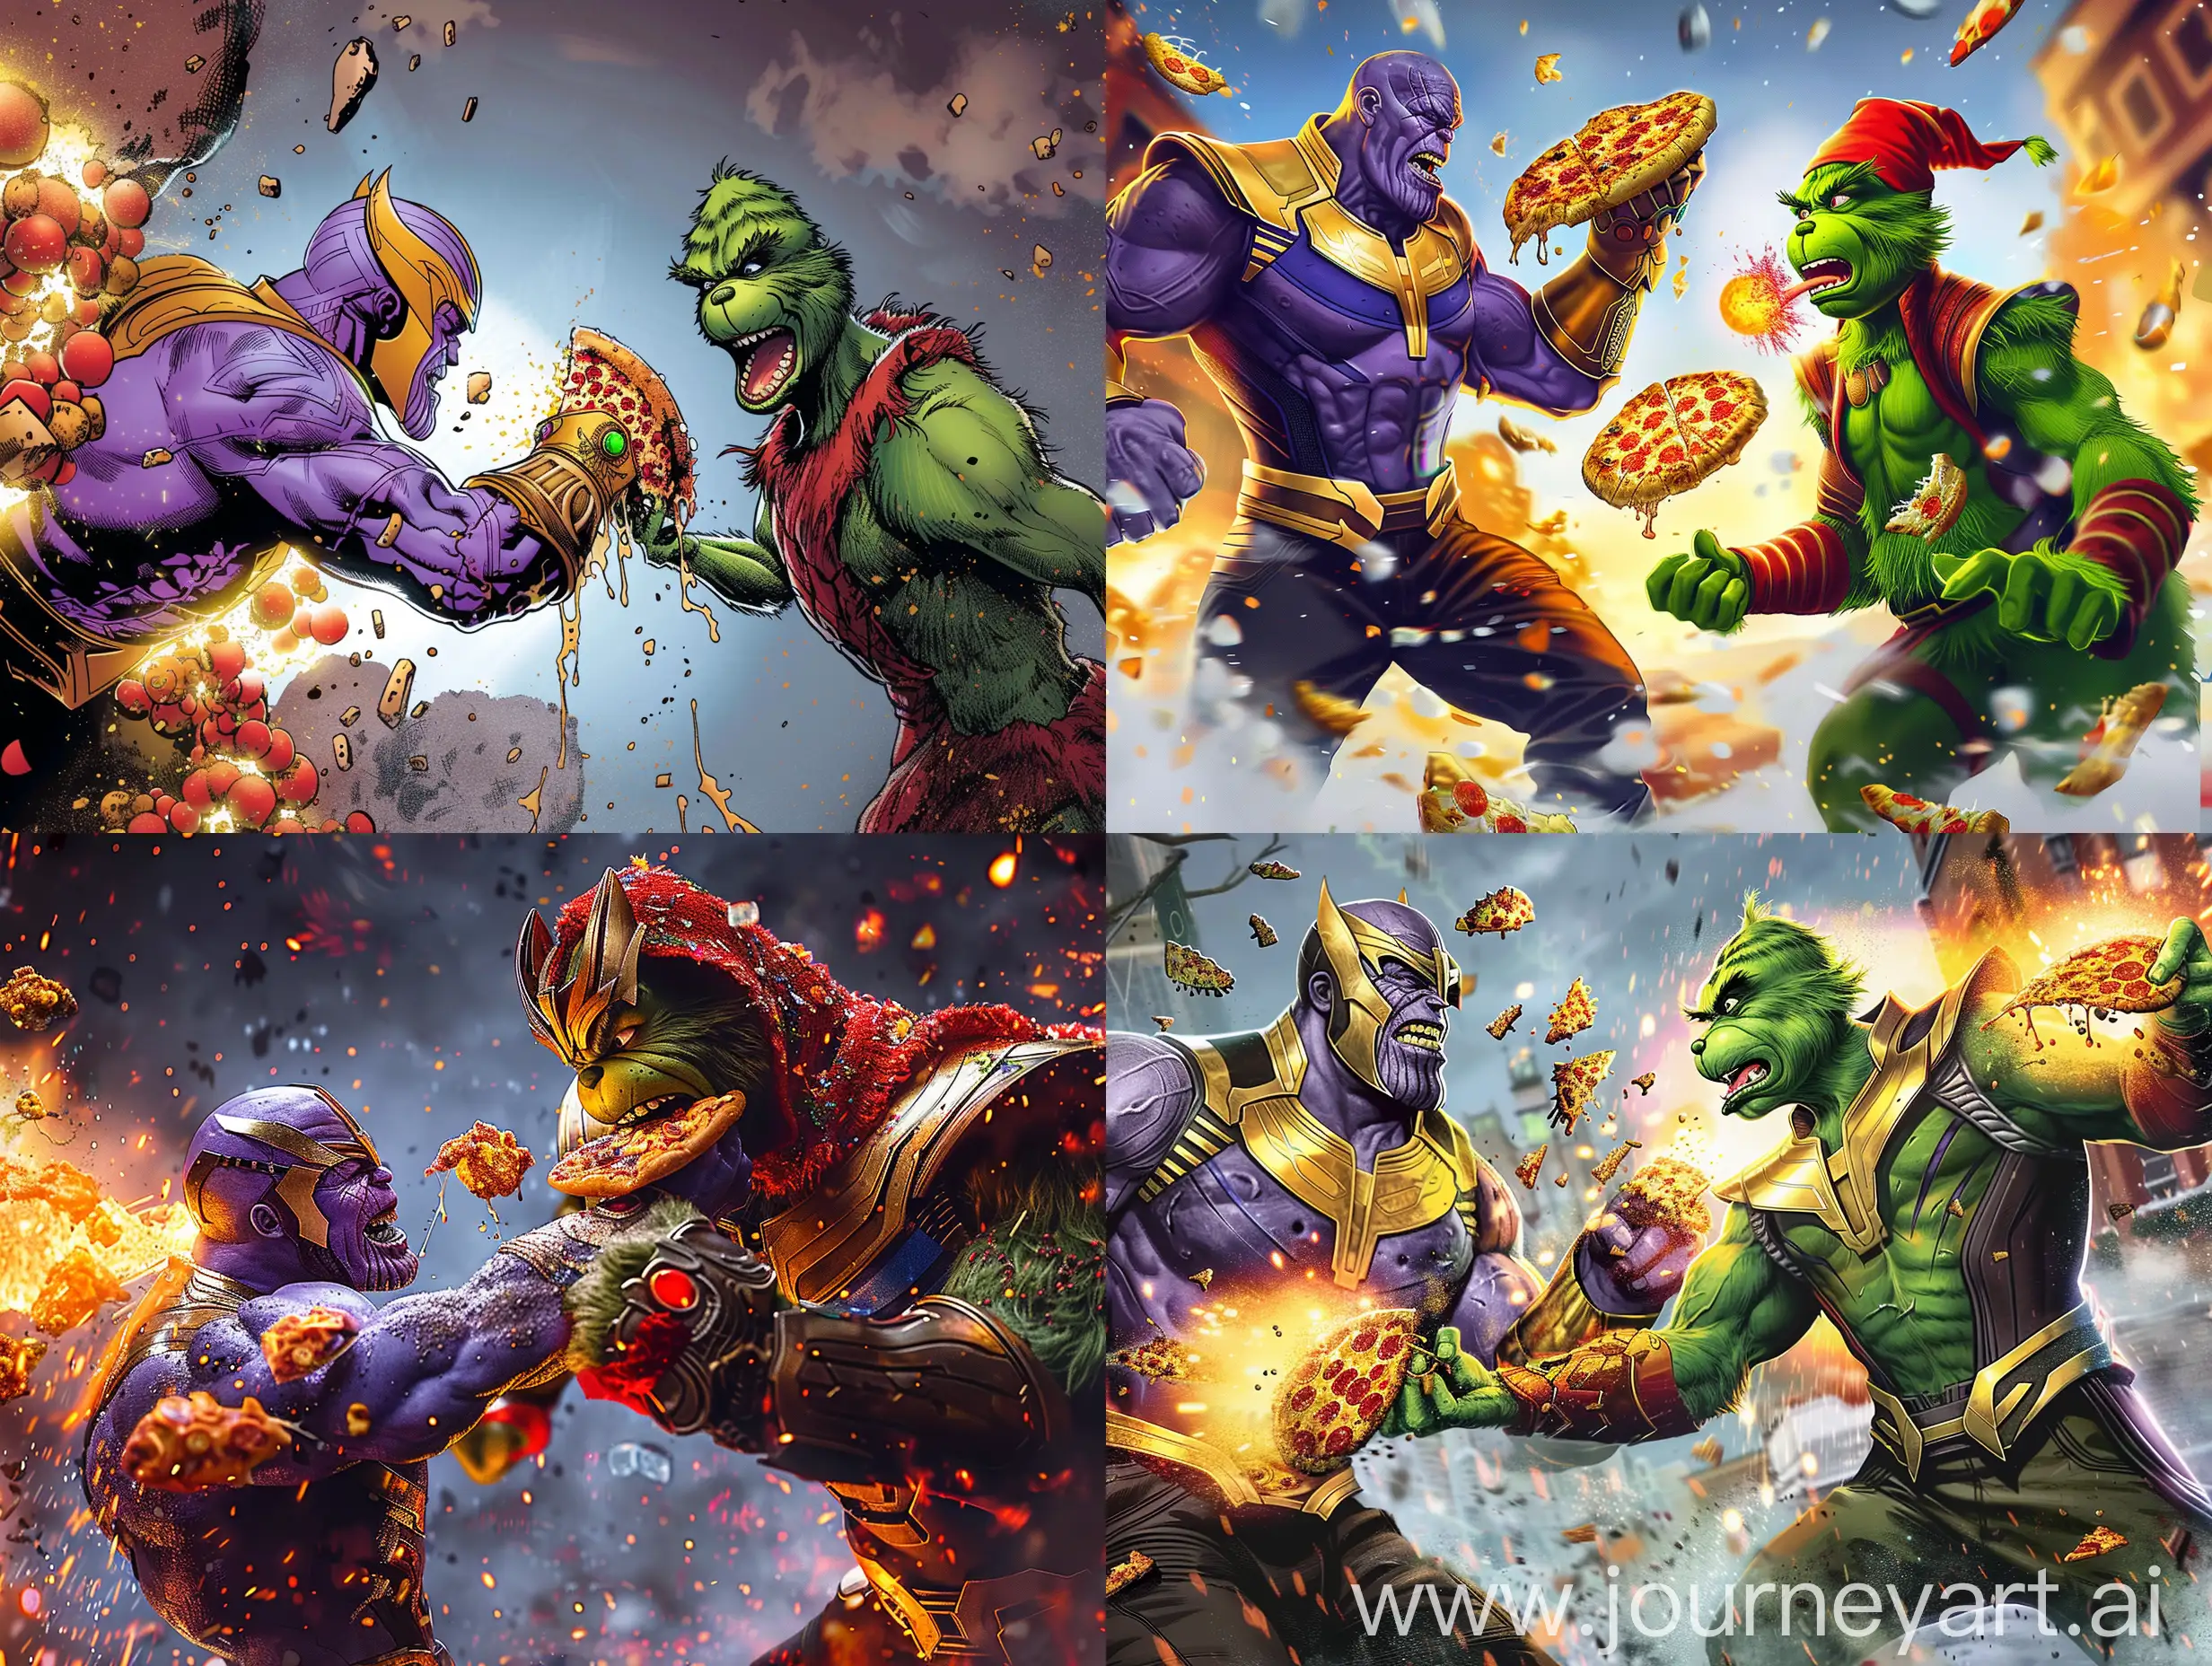 Thanos vs the Grinch extreme pizza delivery fighting and throwing exploding pizza in each other's faces